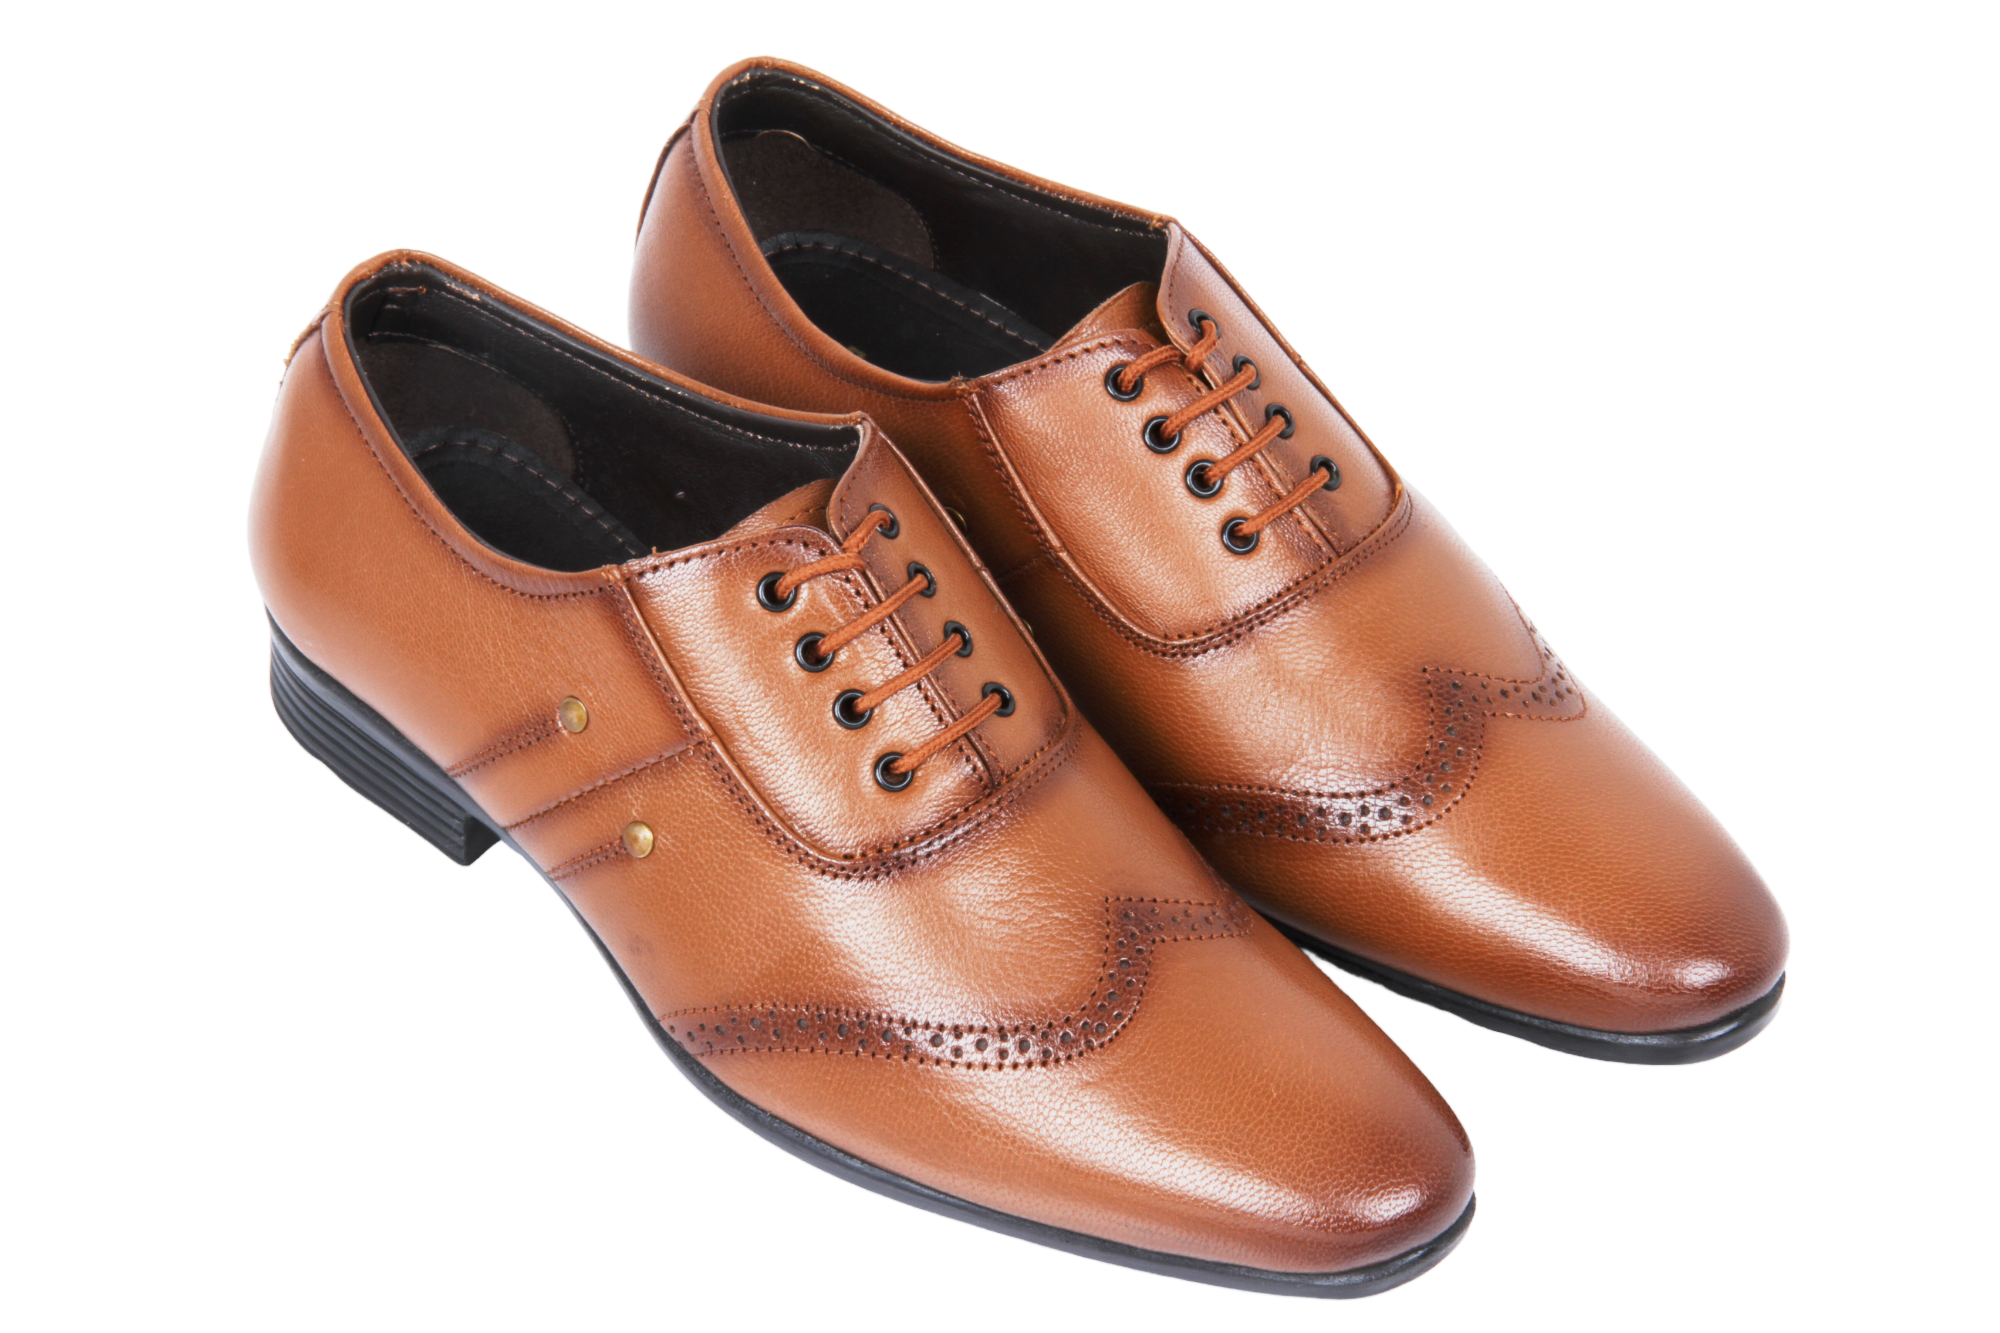 Bacca Bucci OSLO Lace-ups Office Formal Shoes with Superior Comfort